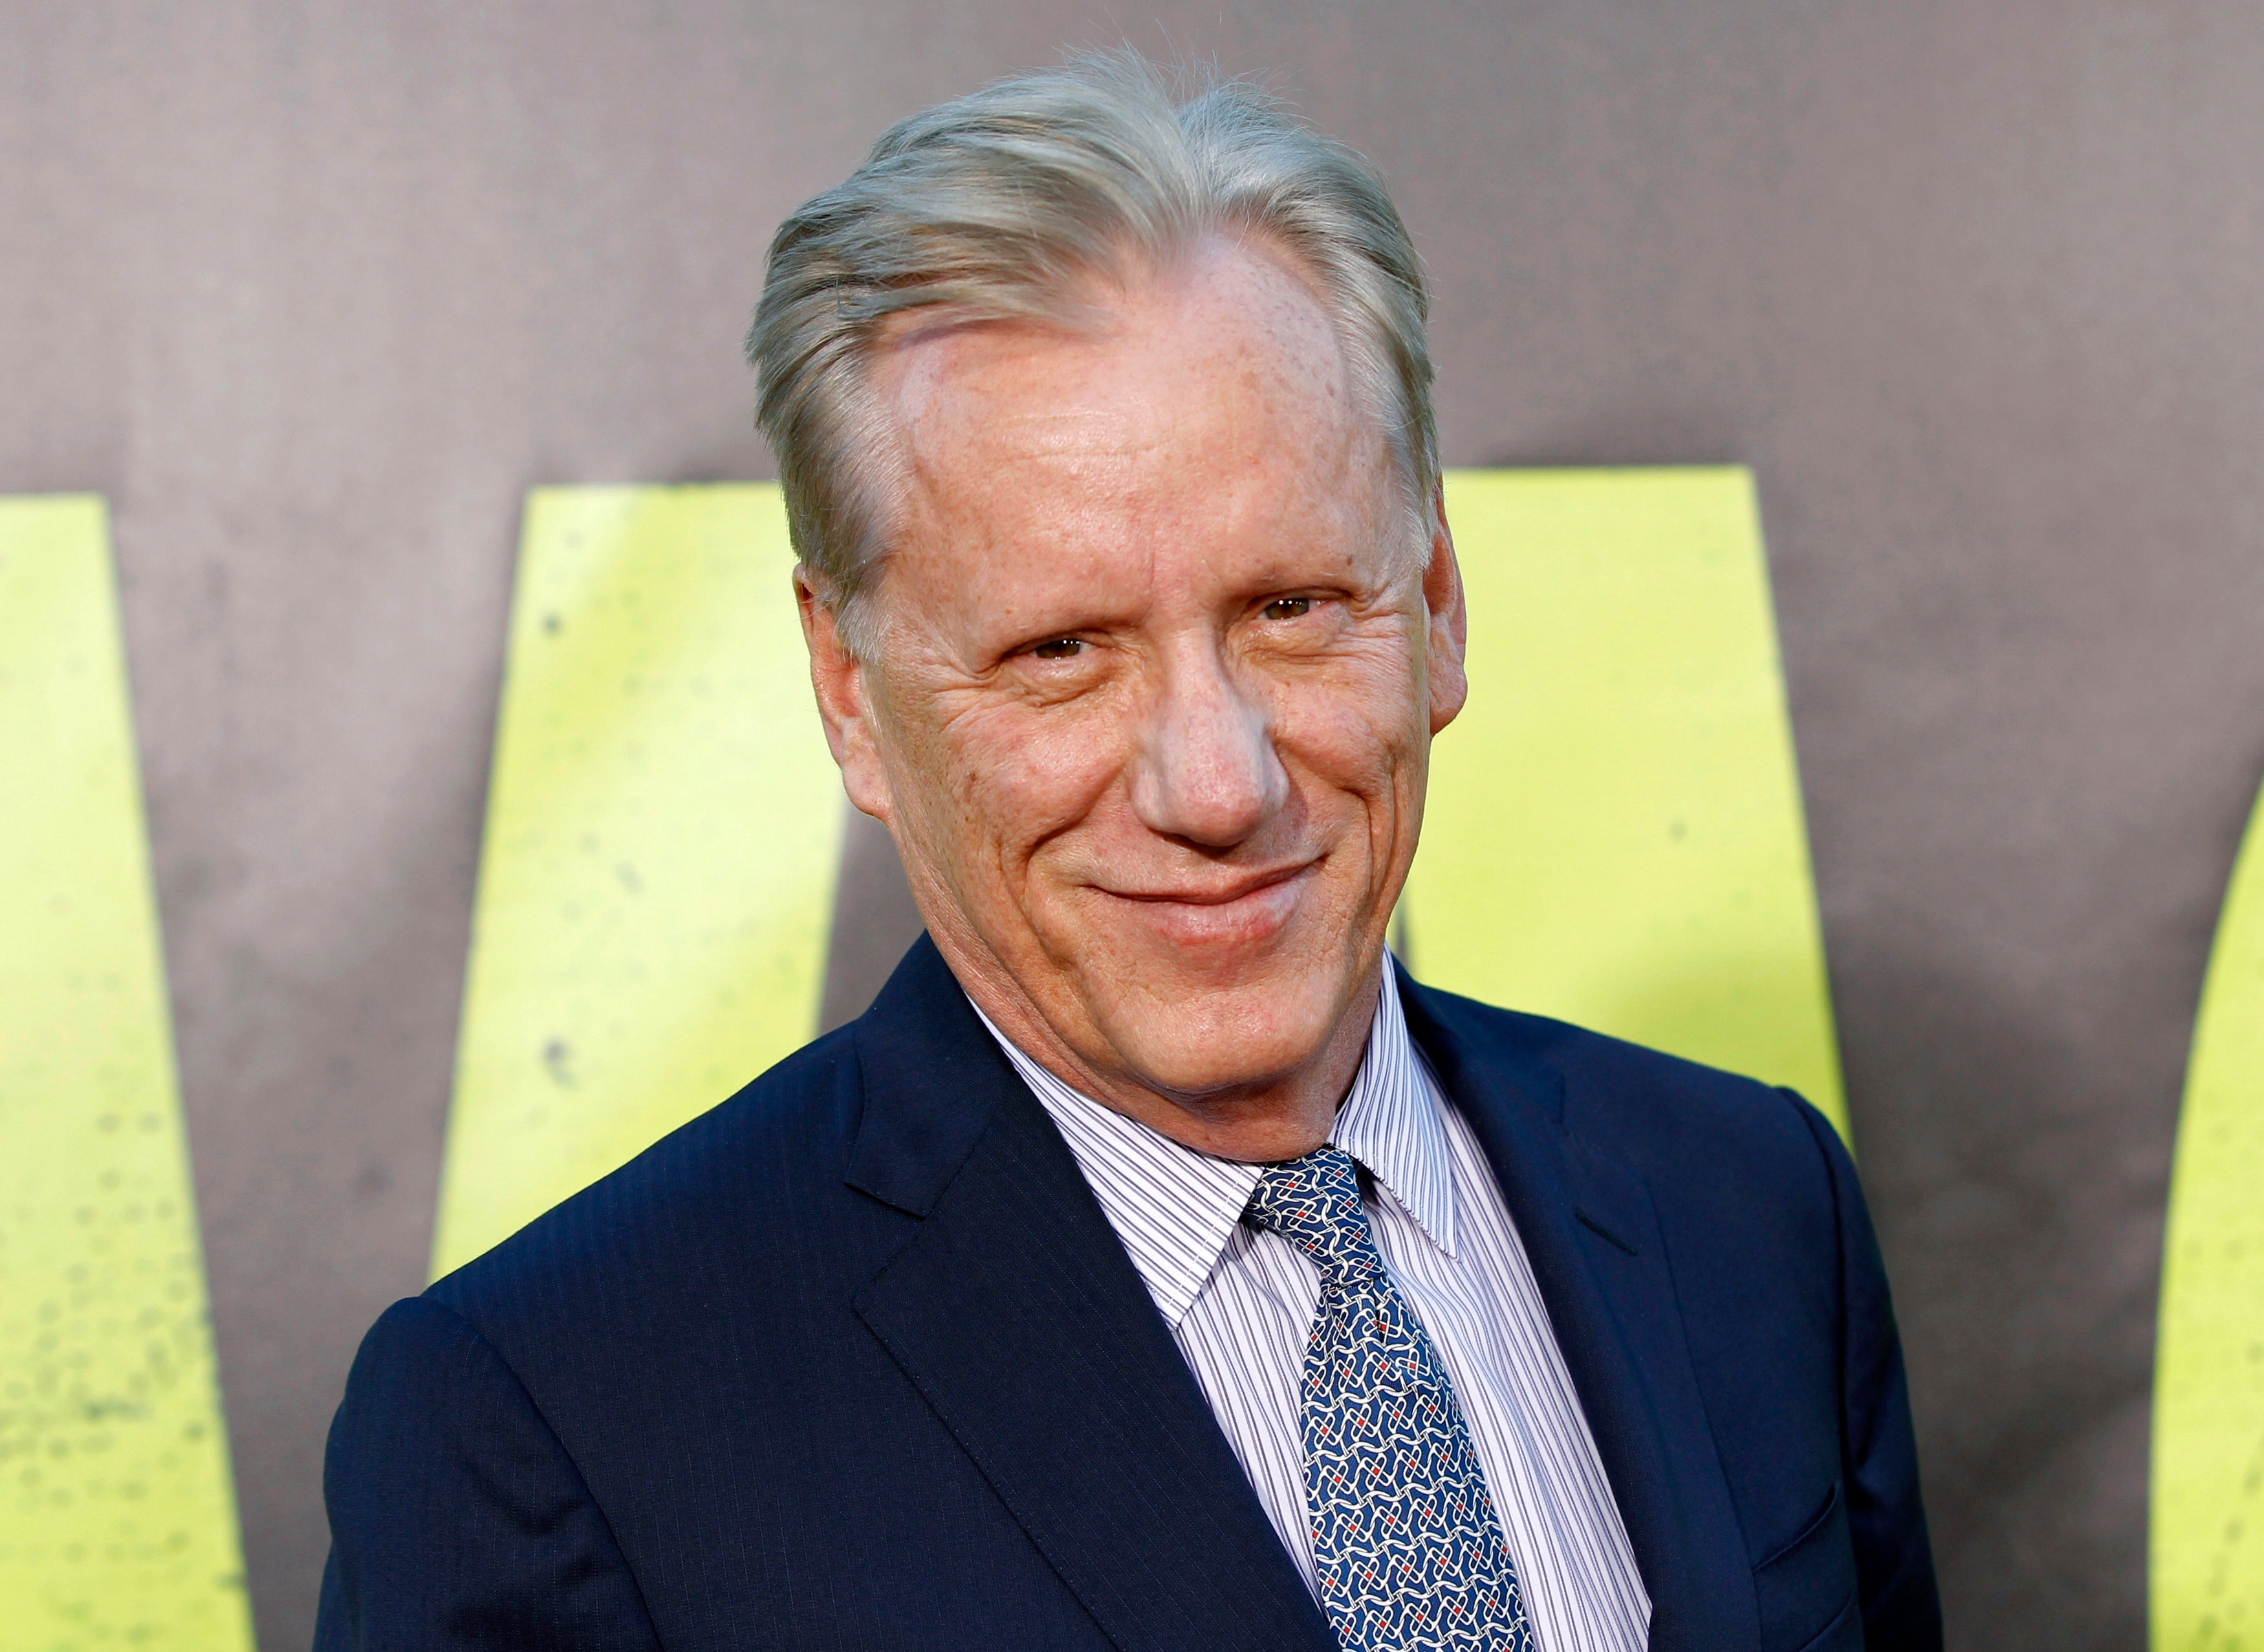 James Woods fires back at Twitter, vows to sue over censorship on ‘Tucker Carlson Tonight’